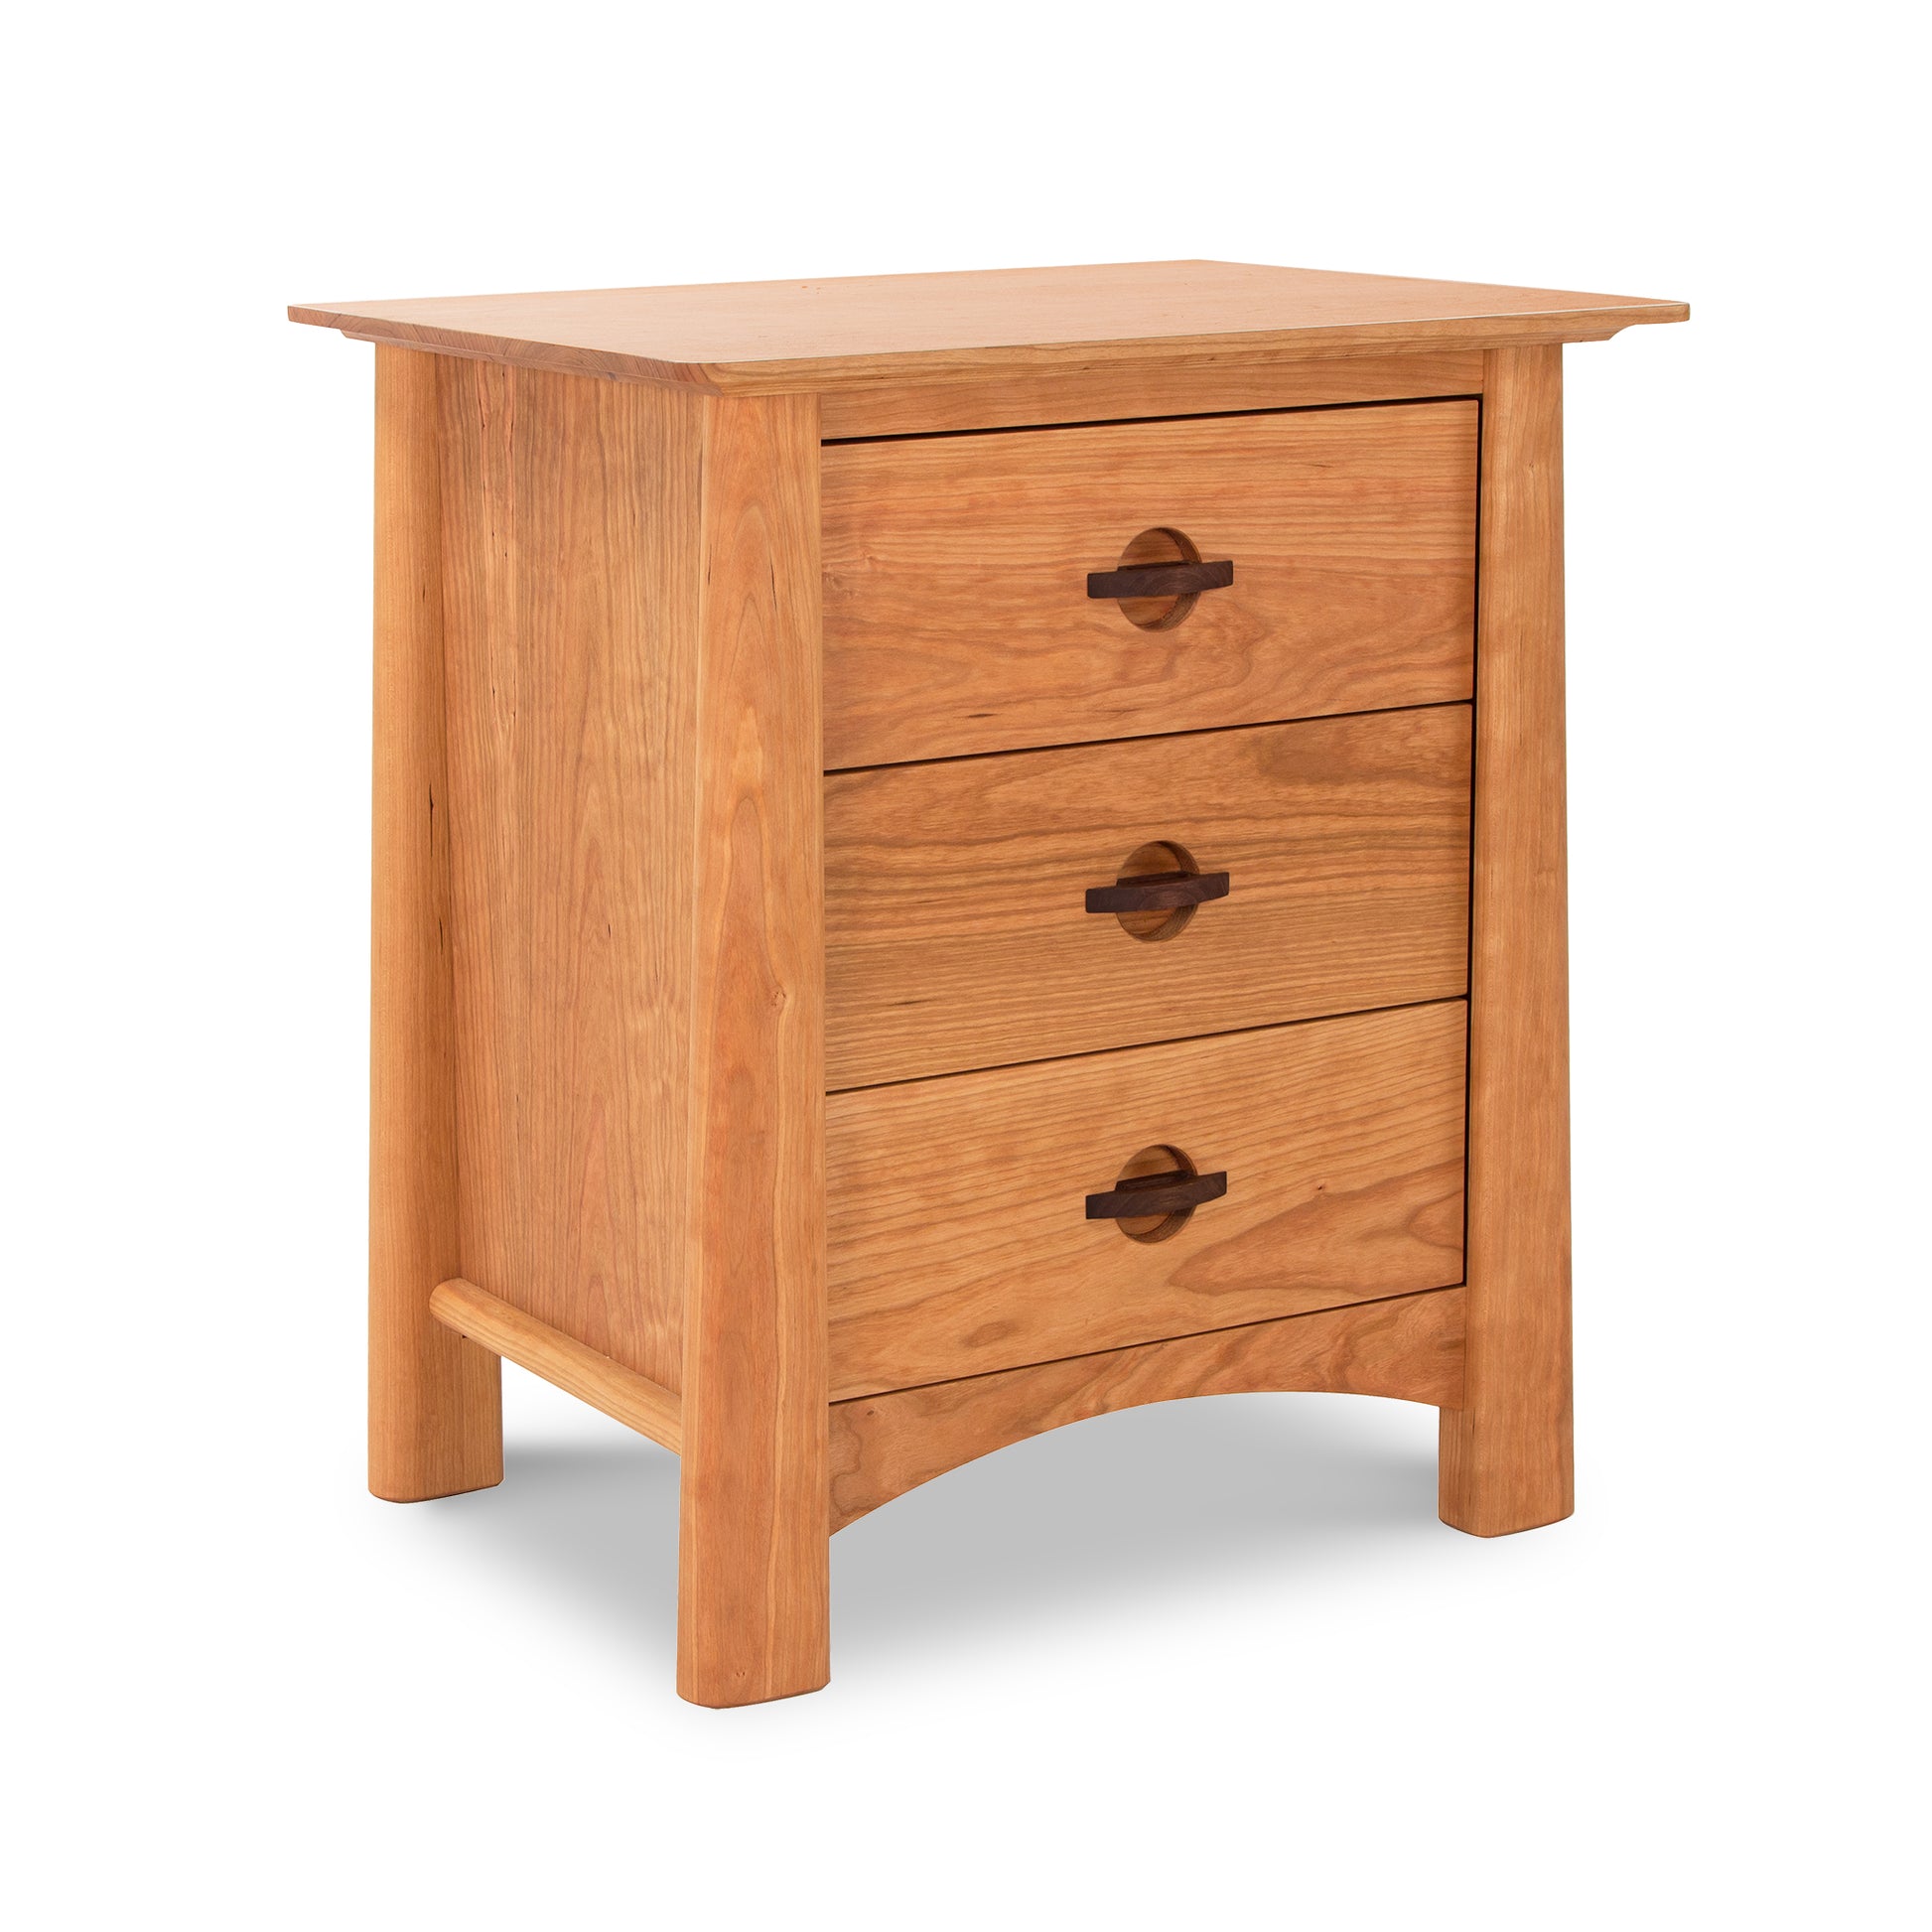 Cherry Moon 3-Drawer Wooden Nightstand by Maple Corner Woodworks - Handcrafted from Sustainable Hardwoods with Semi-Circular Handles and Light Brown Finish. High Quality, American Made Furniture.